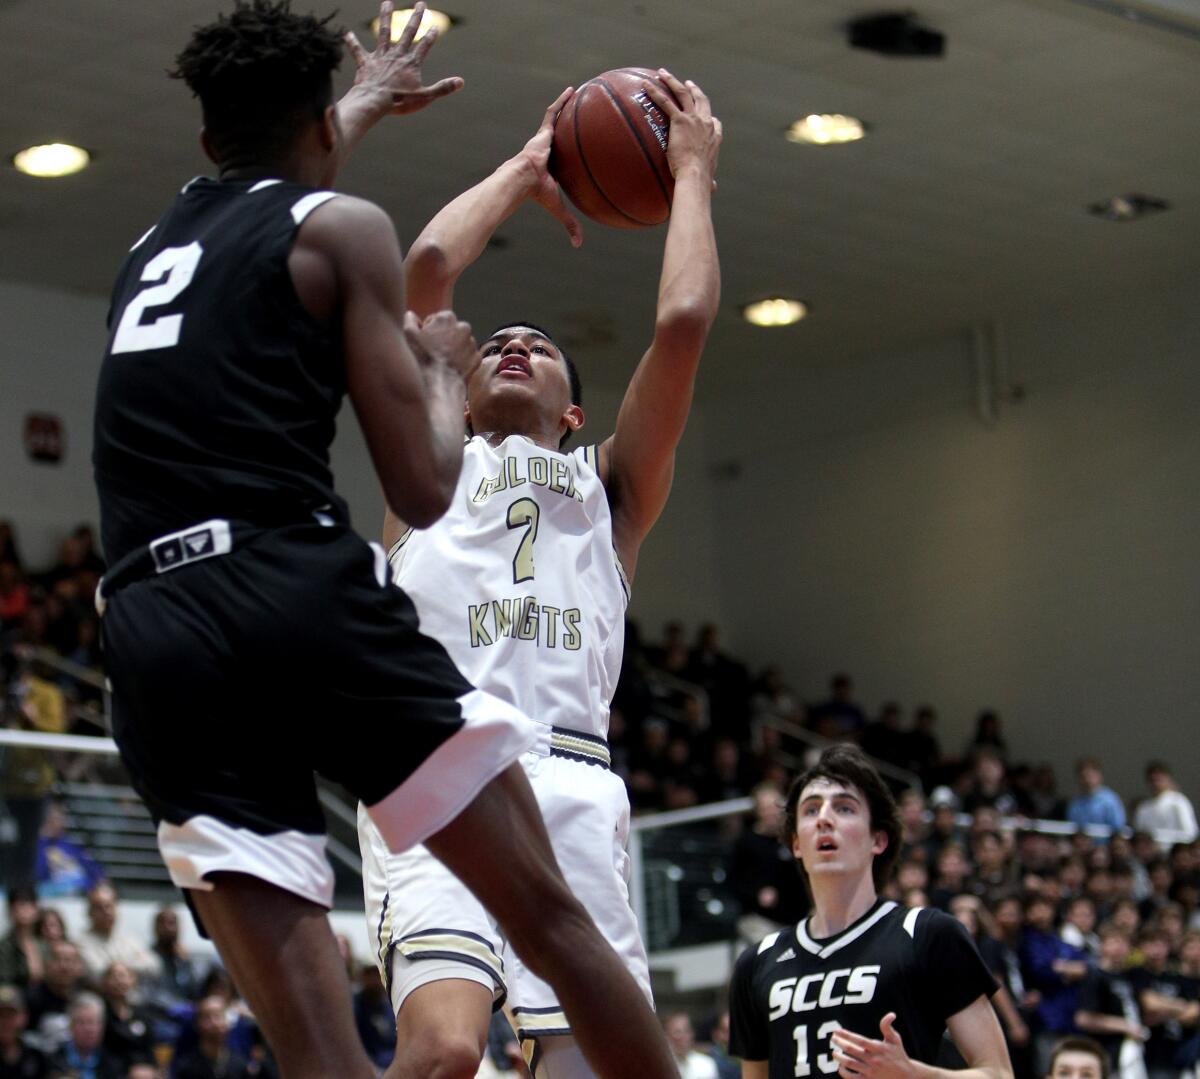 St. Francis' Andre Henry takes a shot under pressure from Santa Clarita Christian's Josh O'Garro during the Southern Section Division 2AA championship game on Feb. 29, 2020, at Azusa Pacific University.